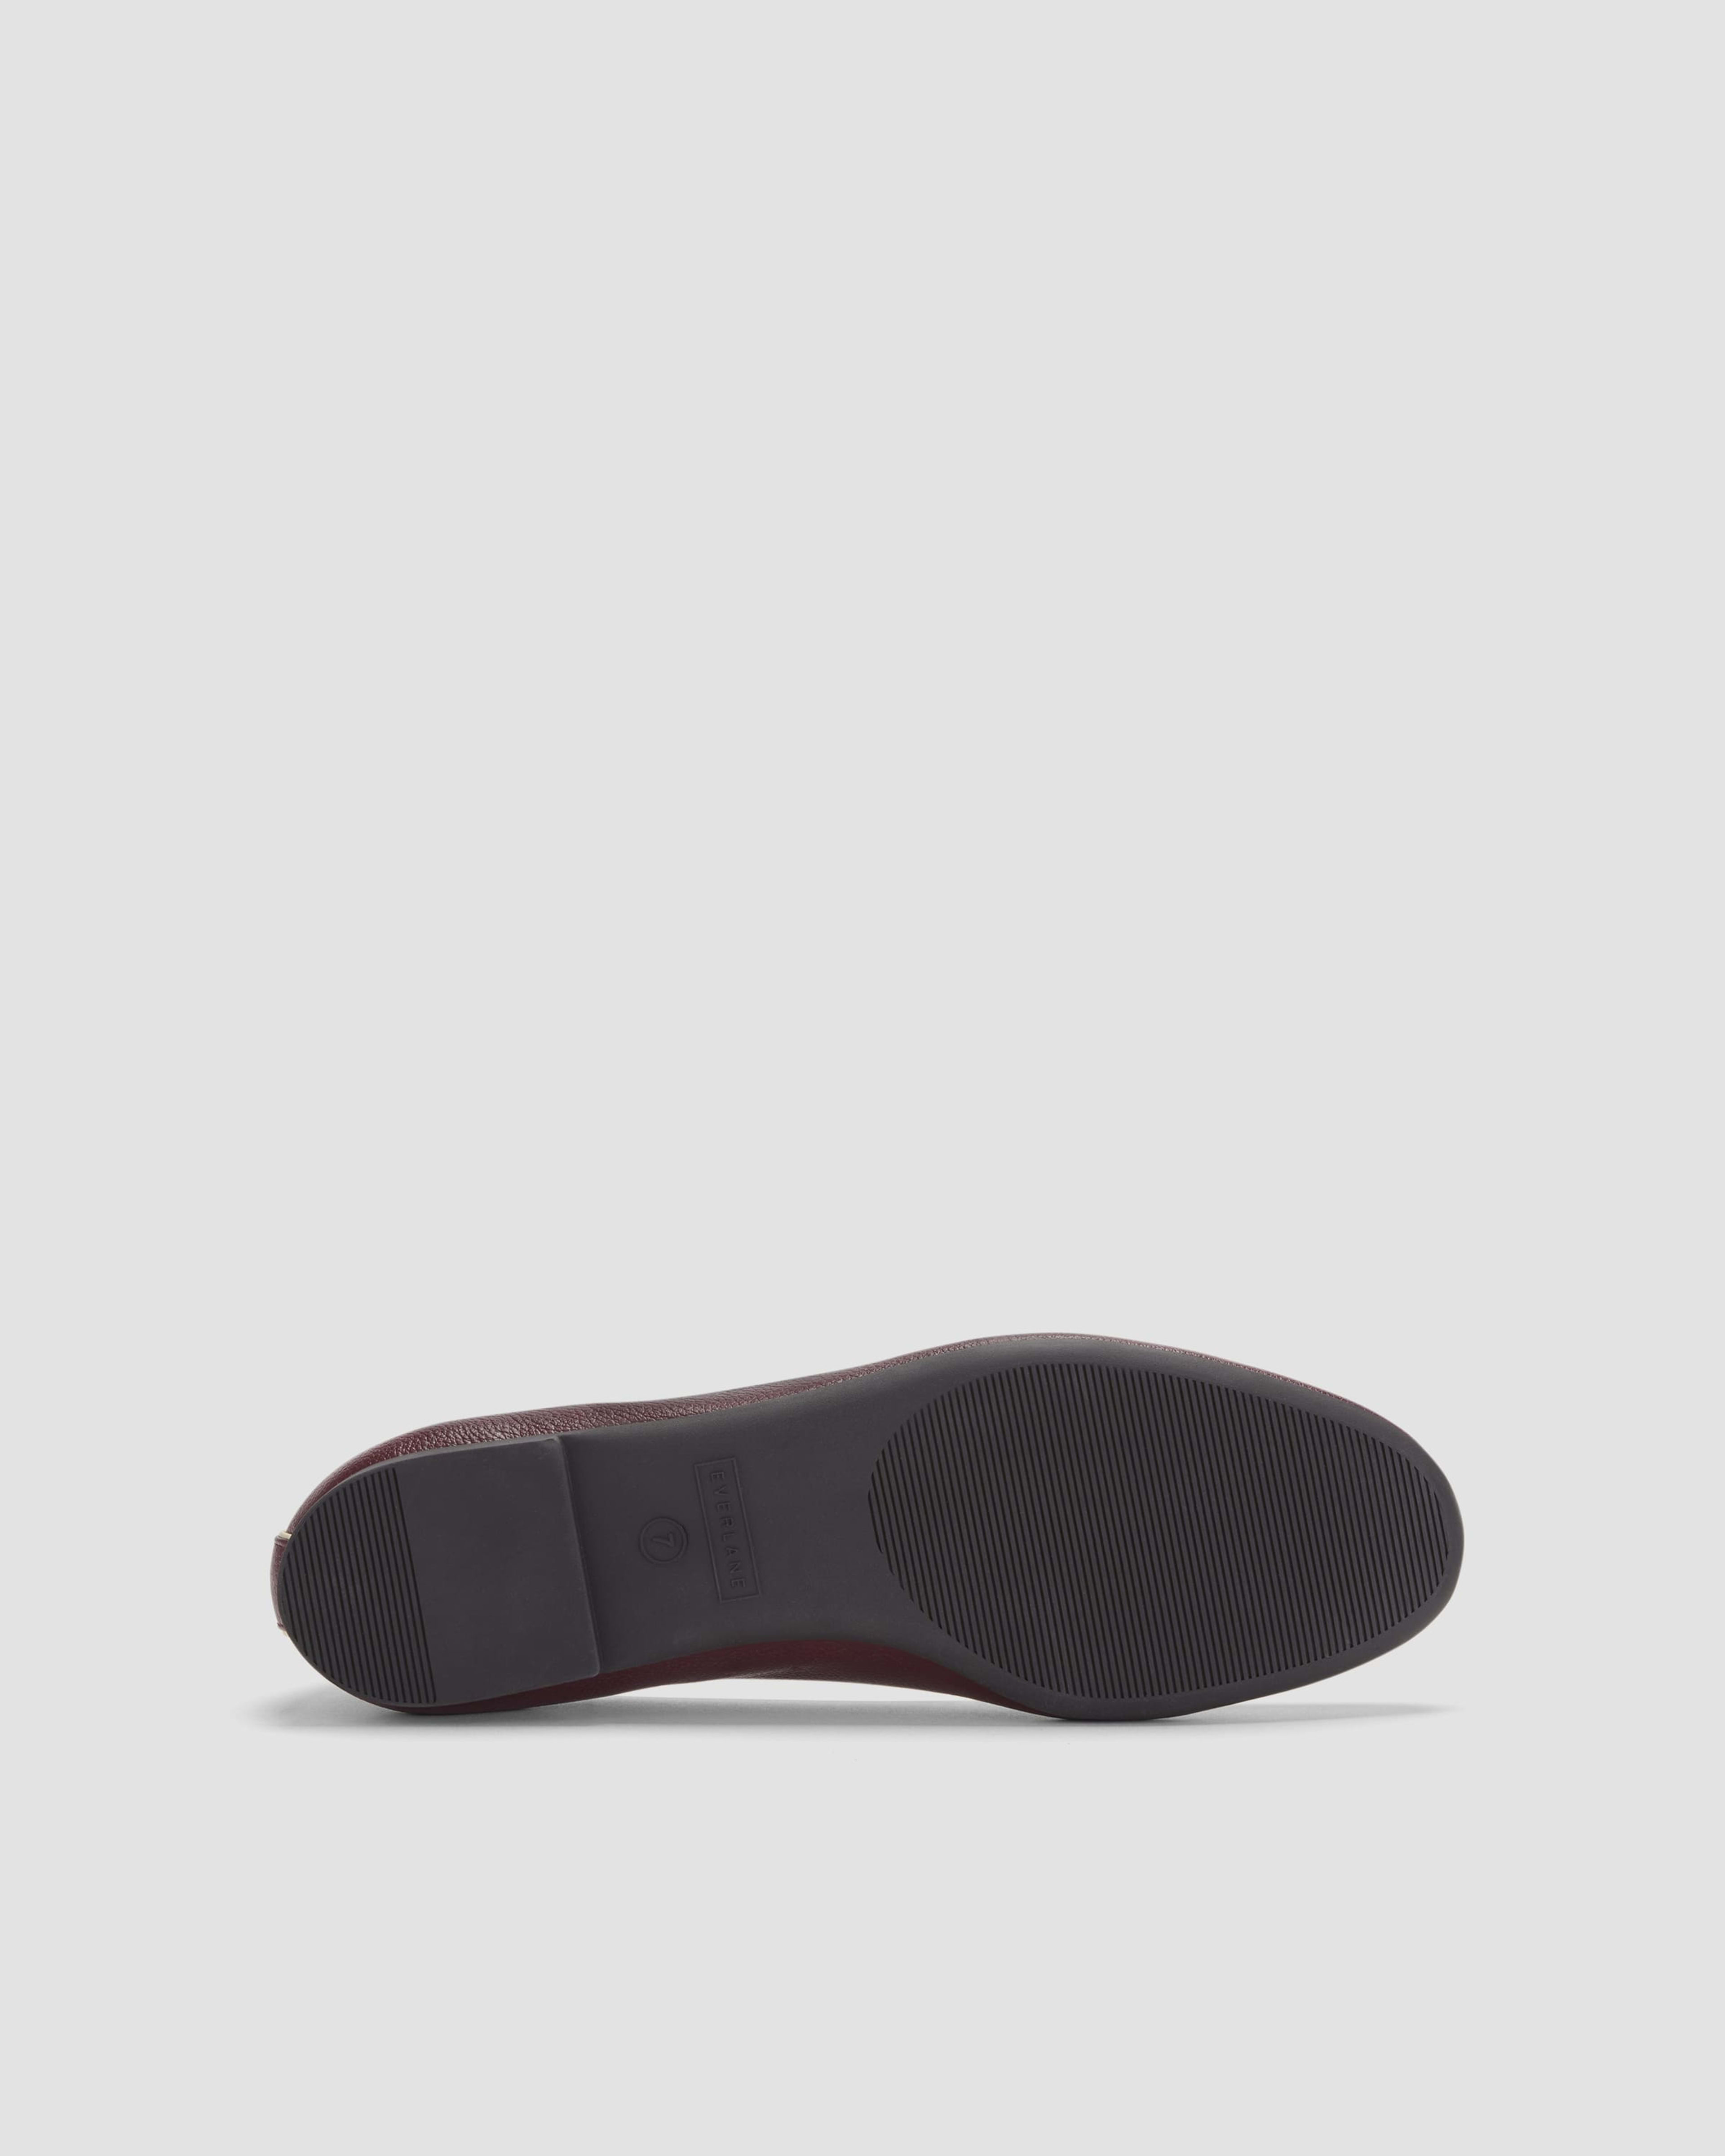 The Day Glove Bordeaux – Everlane